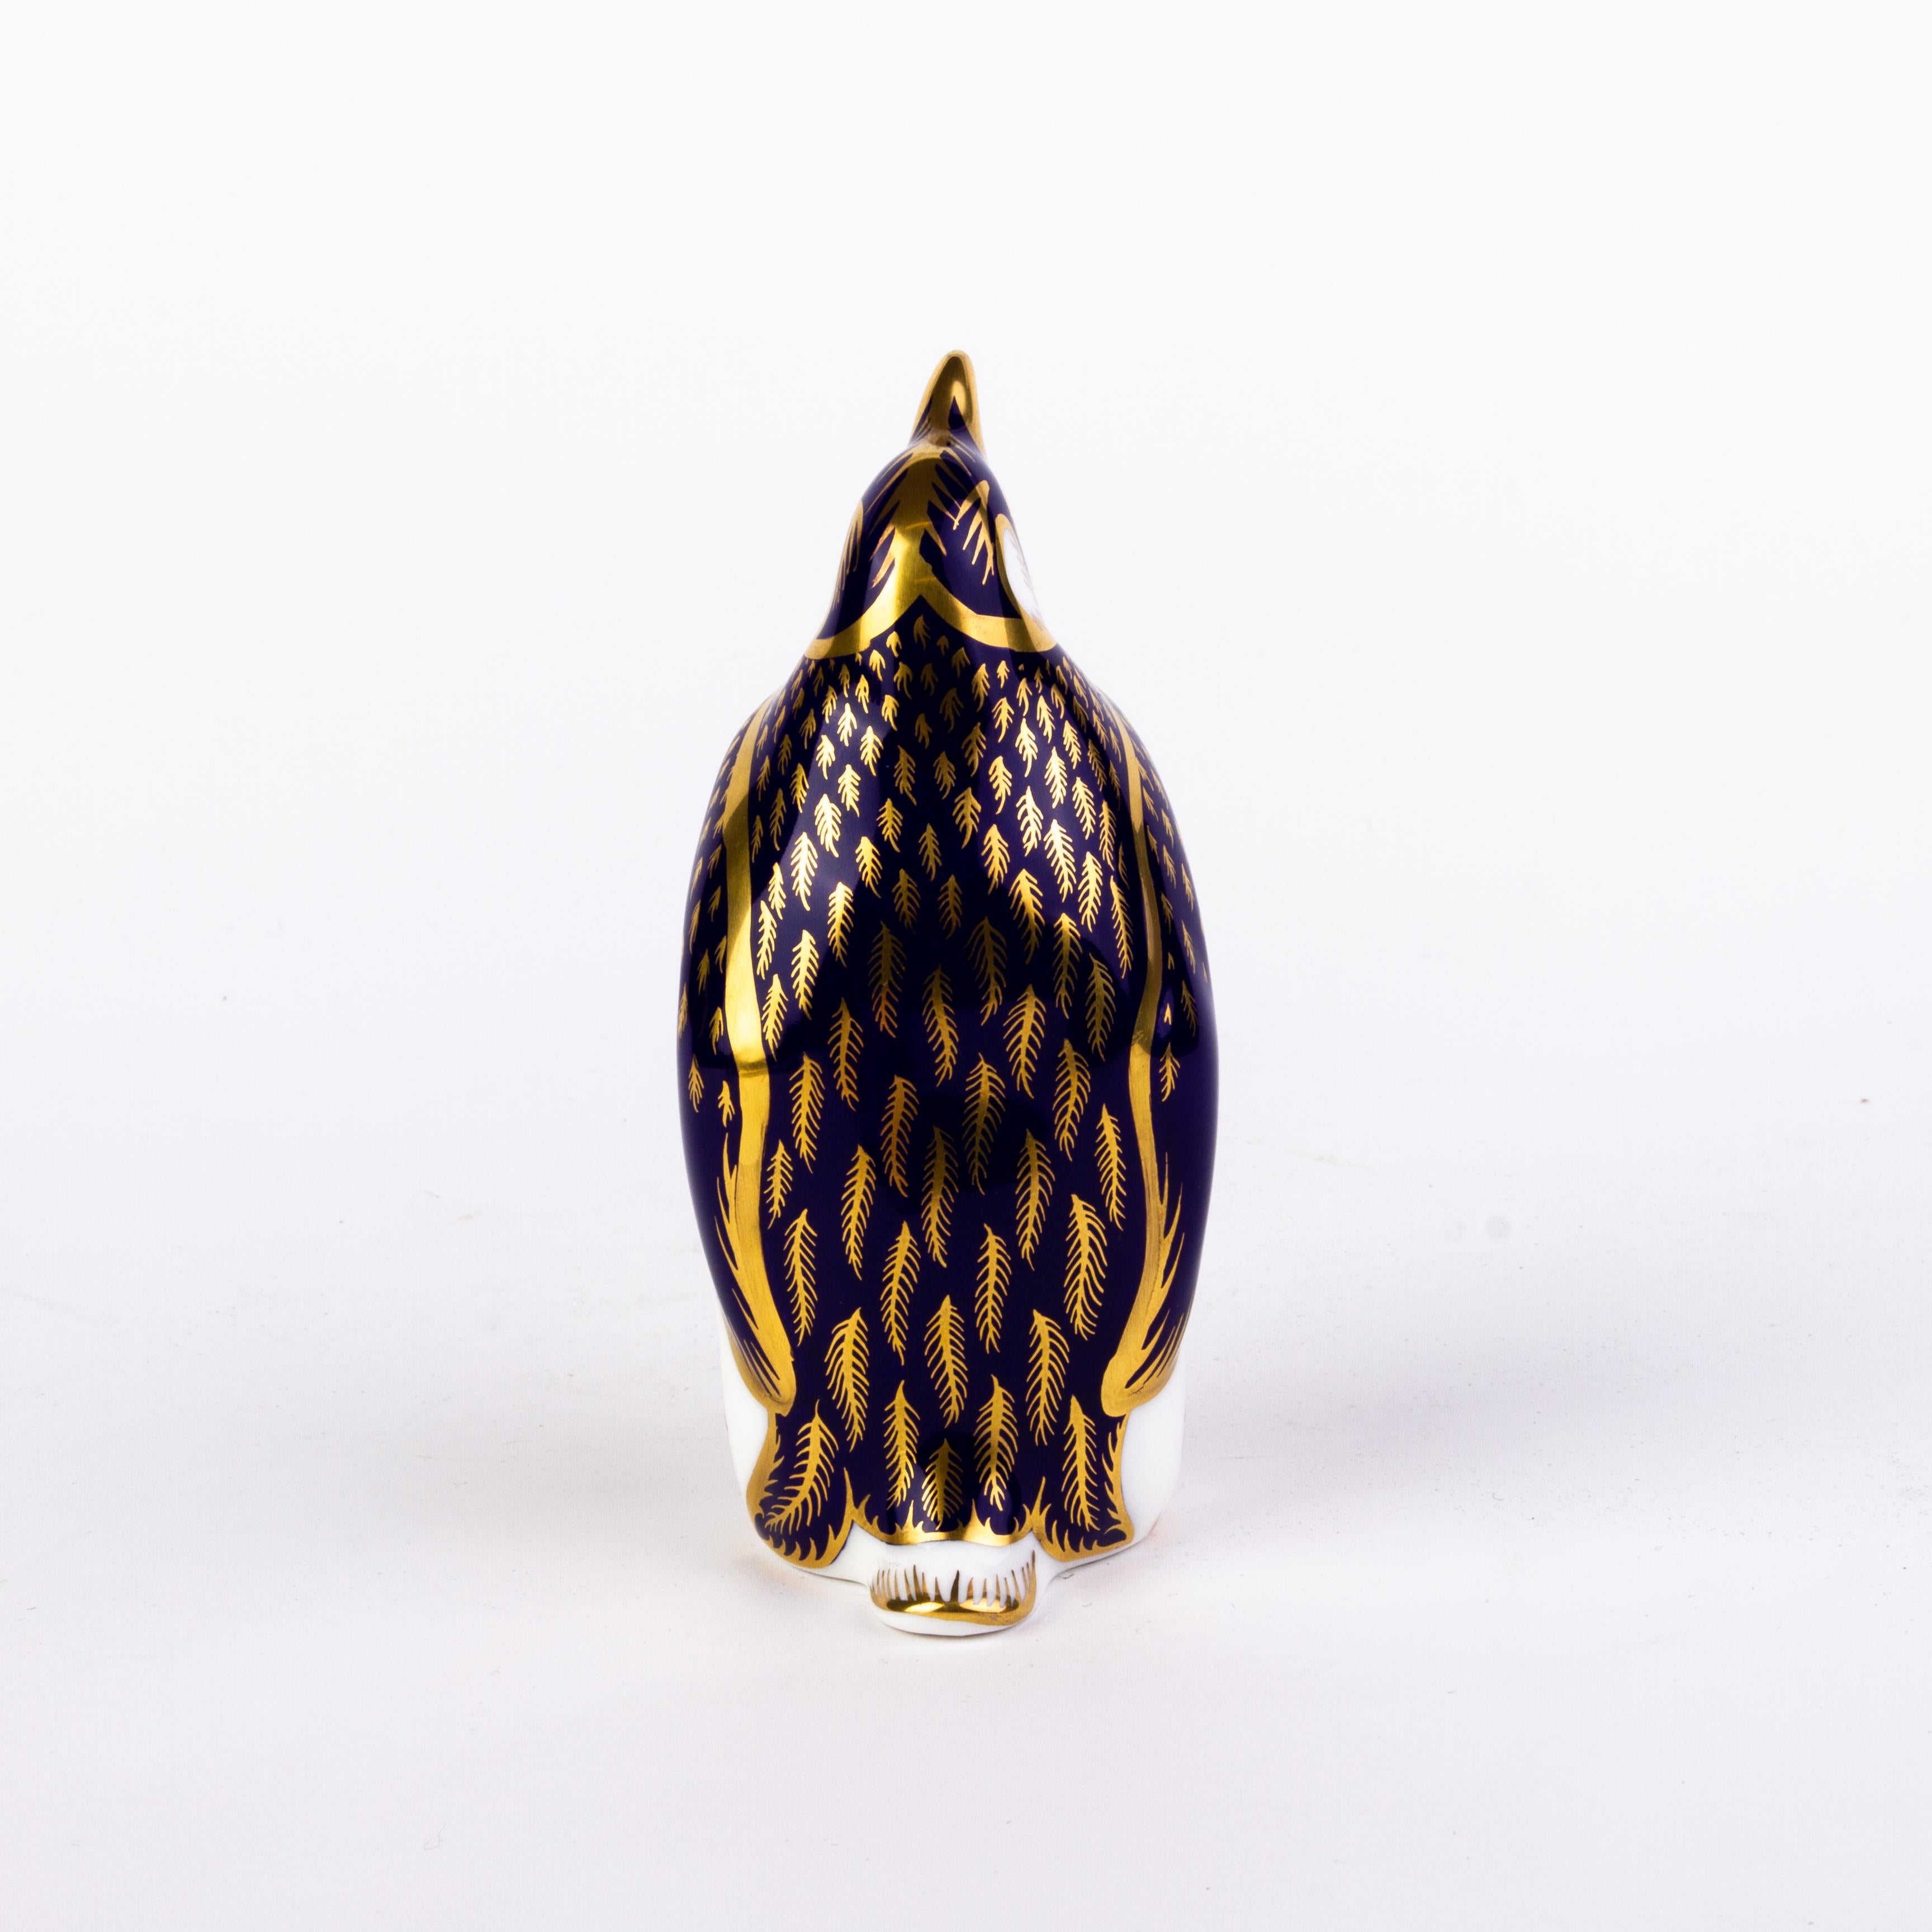 English Royal Crown Derby 24K Gold Porcelain Paperweight Penguin
Good condition
From a private collection.
Free international shipping.